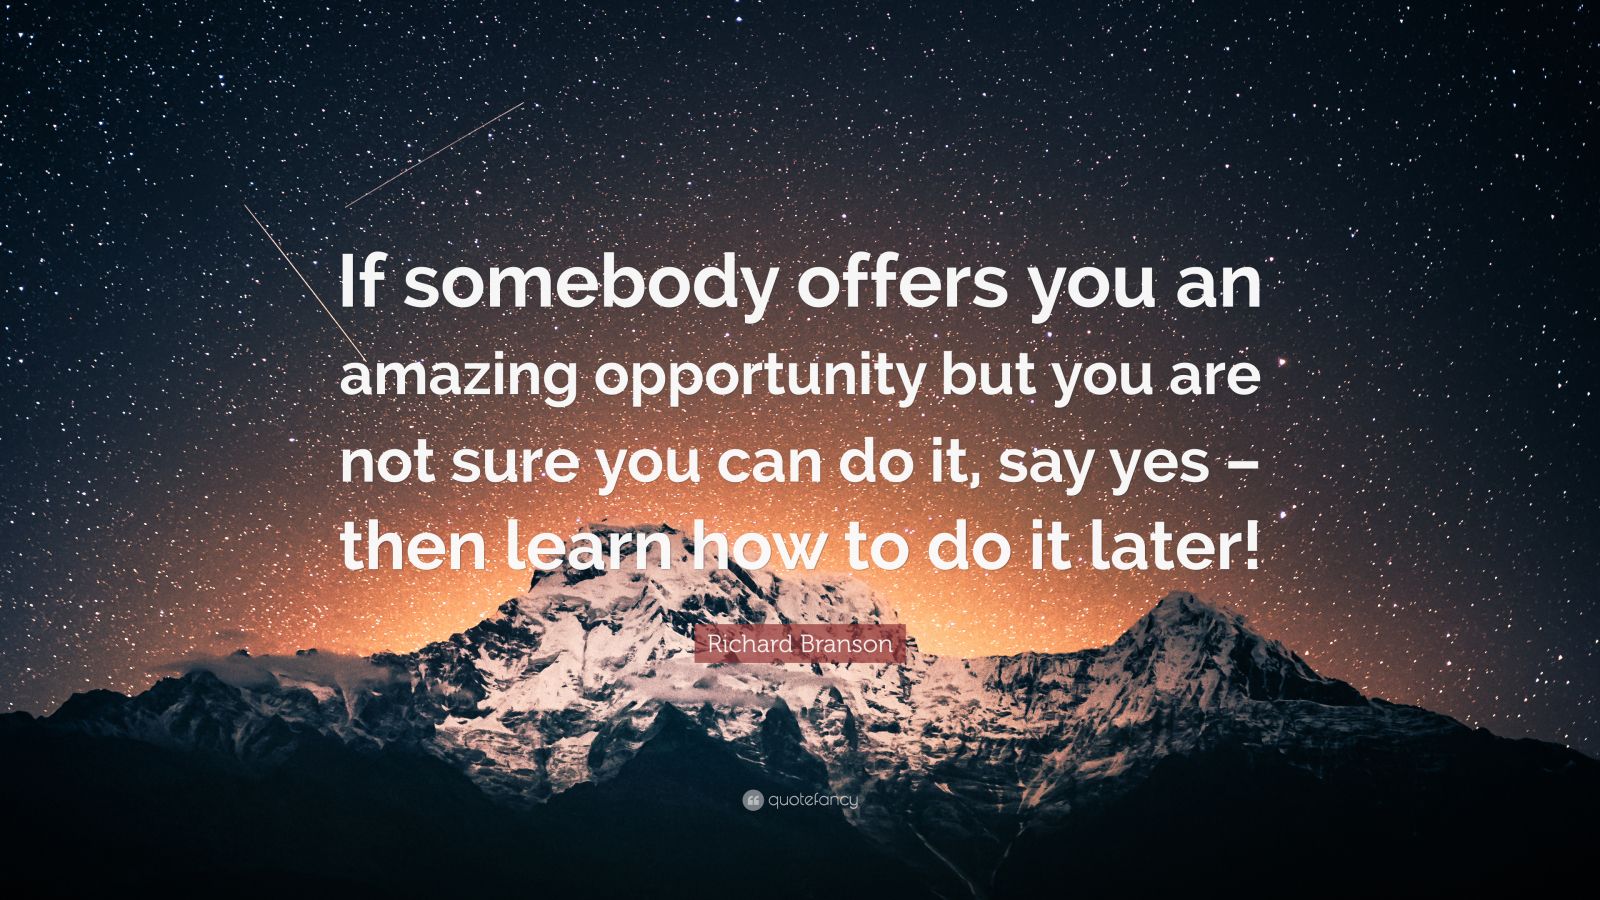 Richard Branson Quote: “If somebody offers you an amazing opportunity ...